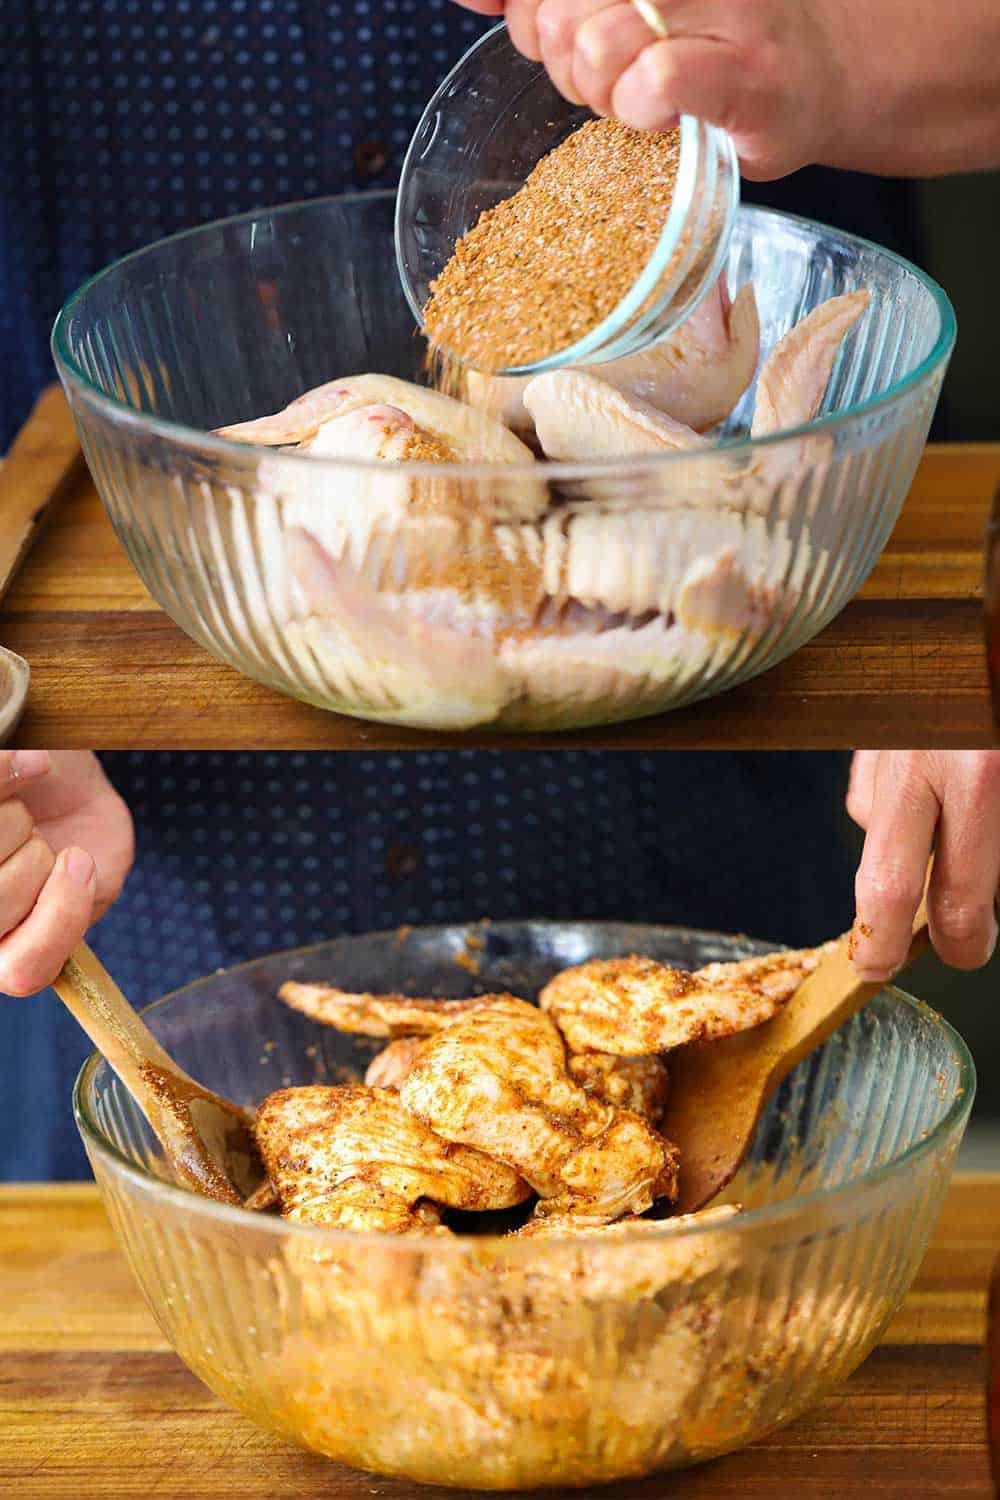 2 stacked photos, the top is a hand dumping a small glass bowl of BBQ rub into a bowl of chicken wings, and the bottom photo is the chicken wings being tossed with two wooden spoons coating the chicken with the rub.